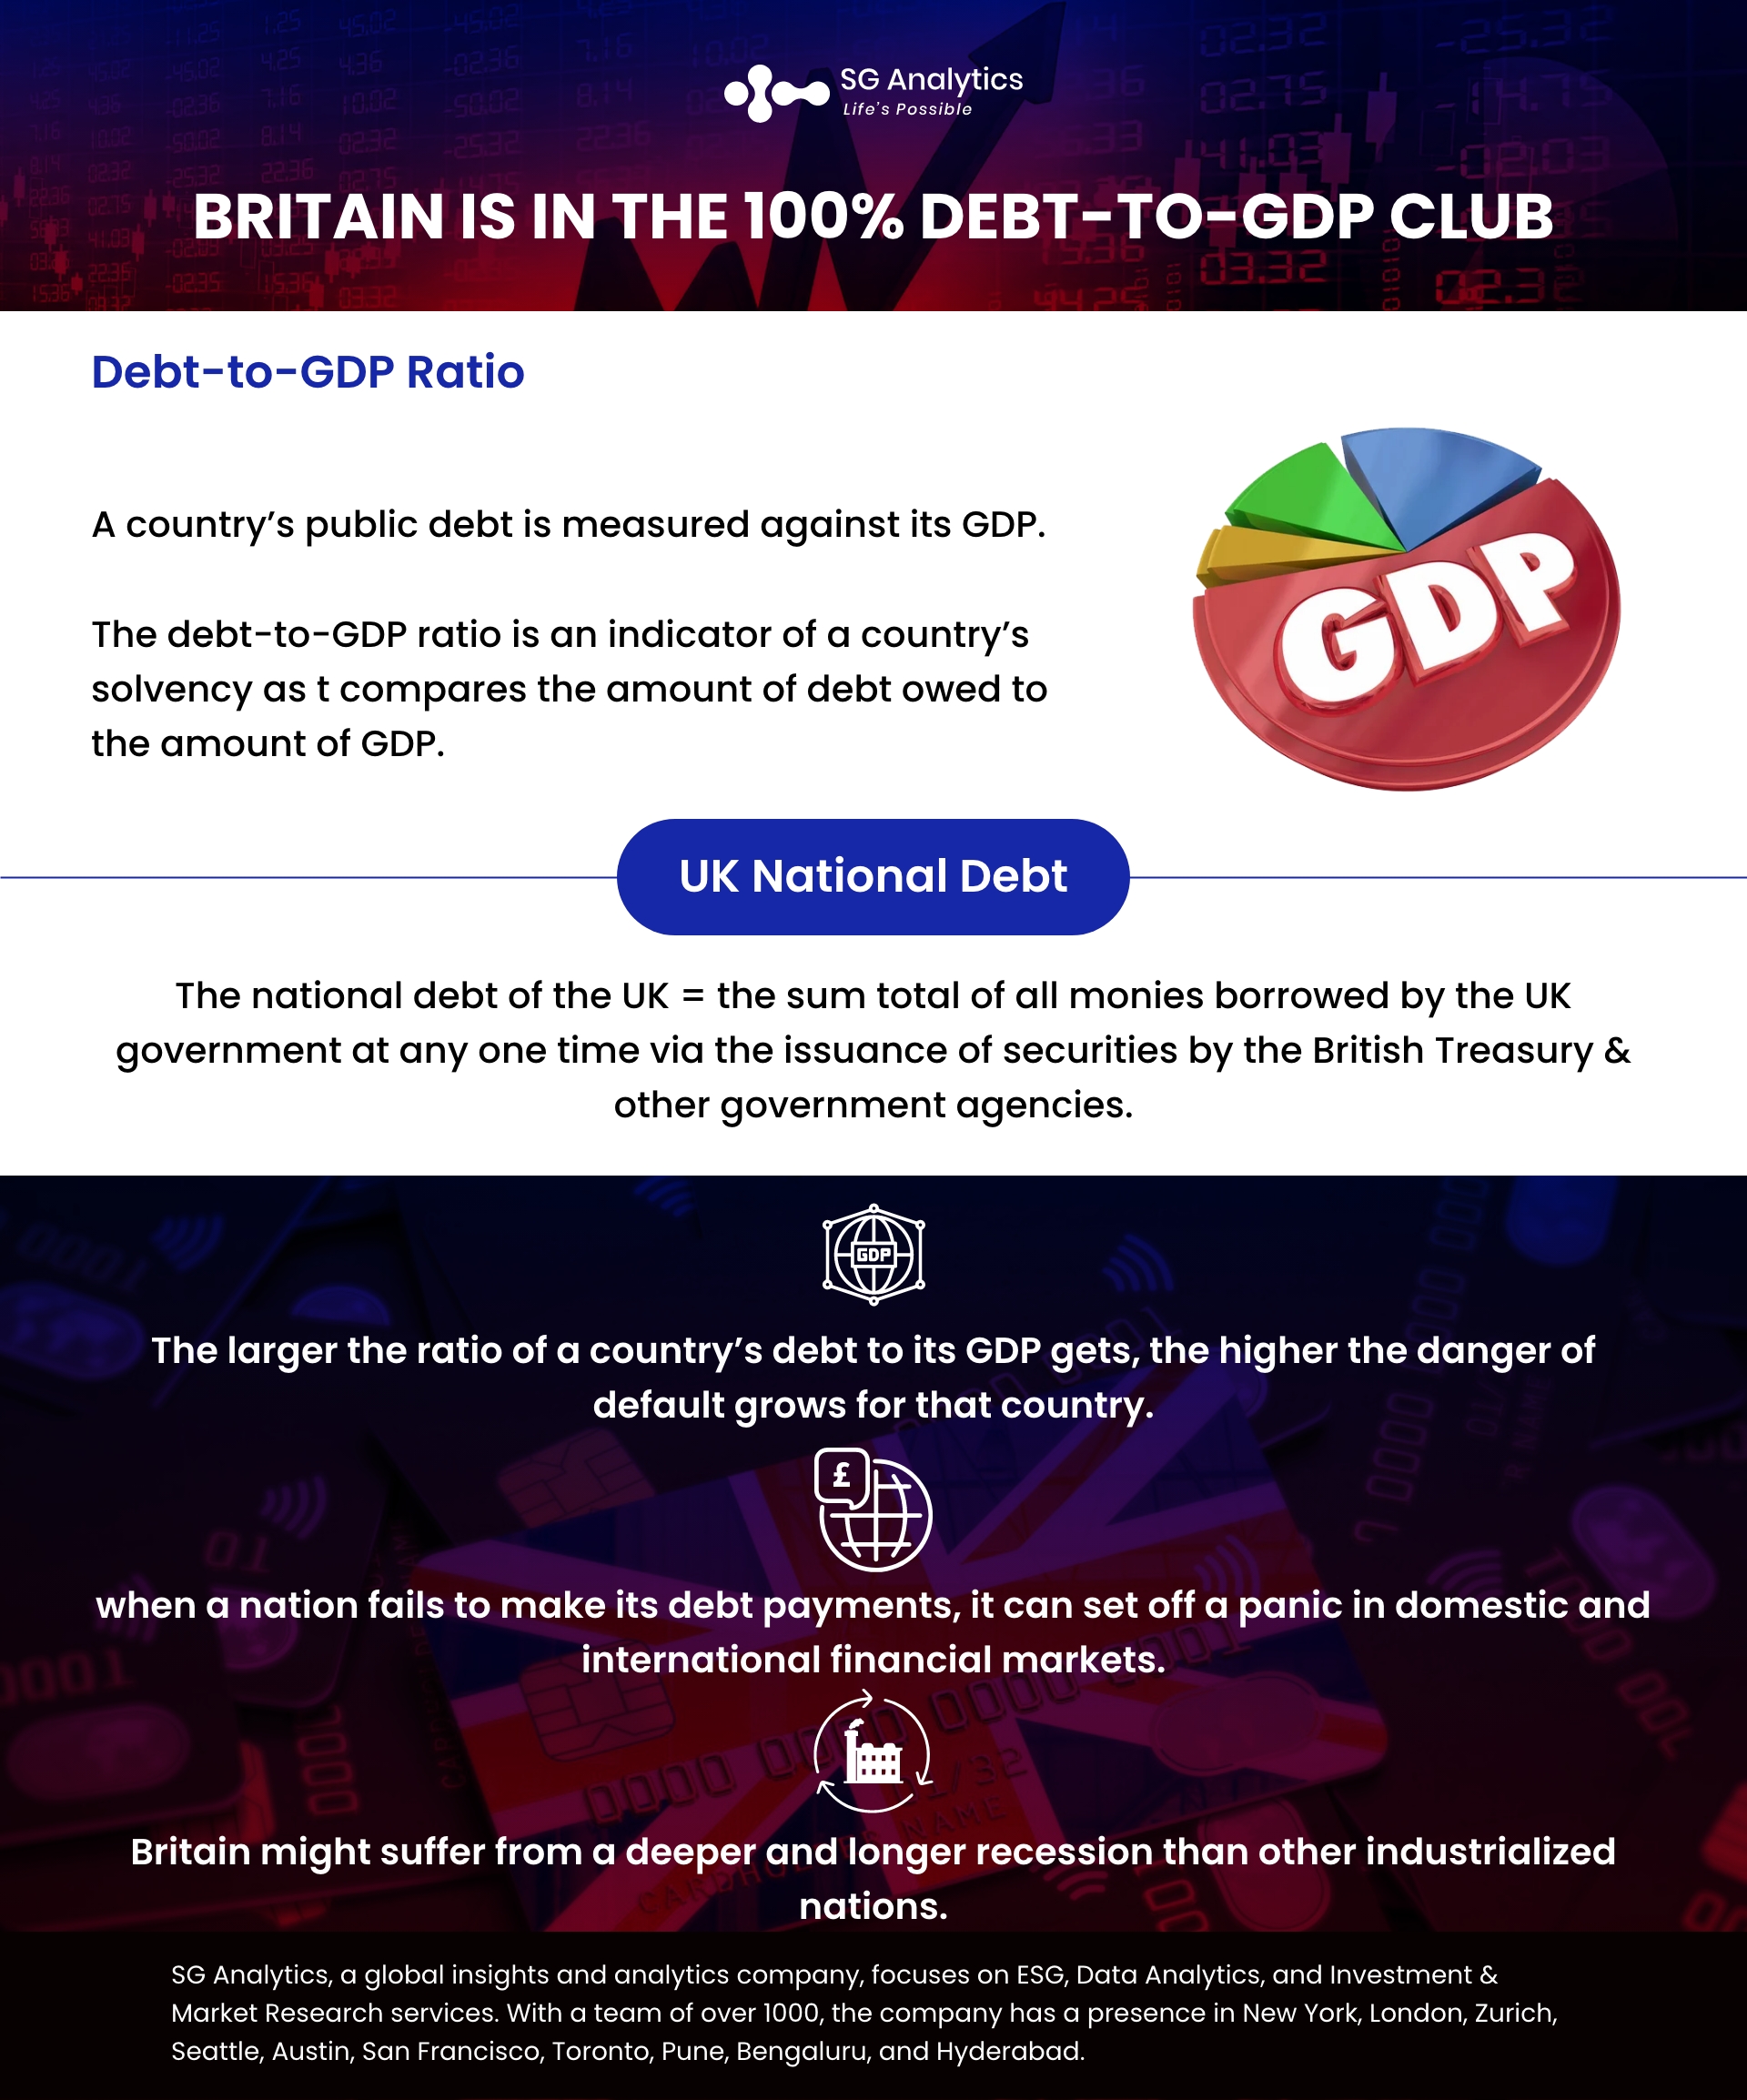 SGAnalytics_Infographic_Britain is in the 100% debt-to-GDP club